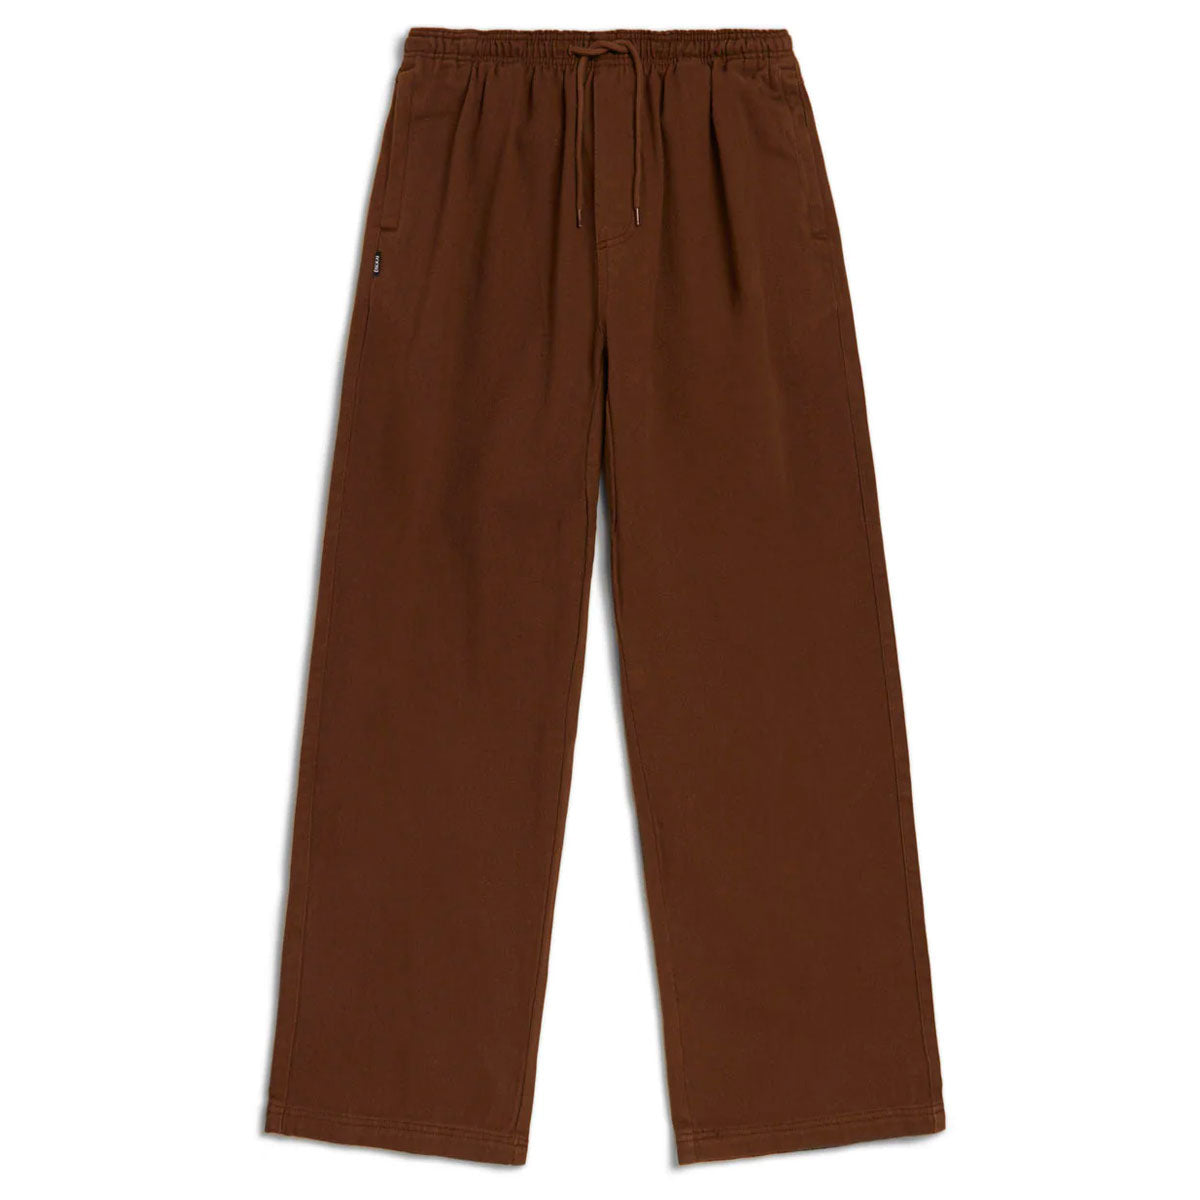 CCS Easy Twill Pants - New Brown image 5